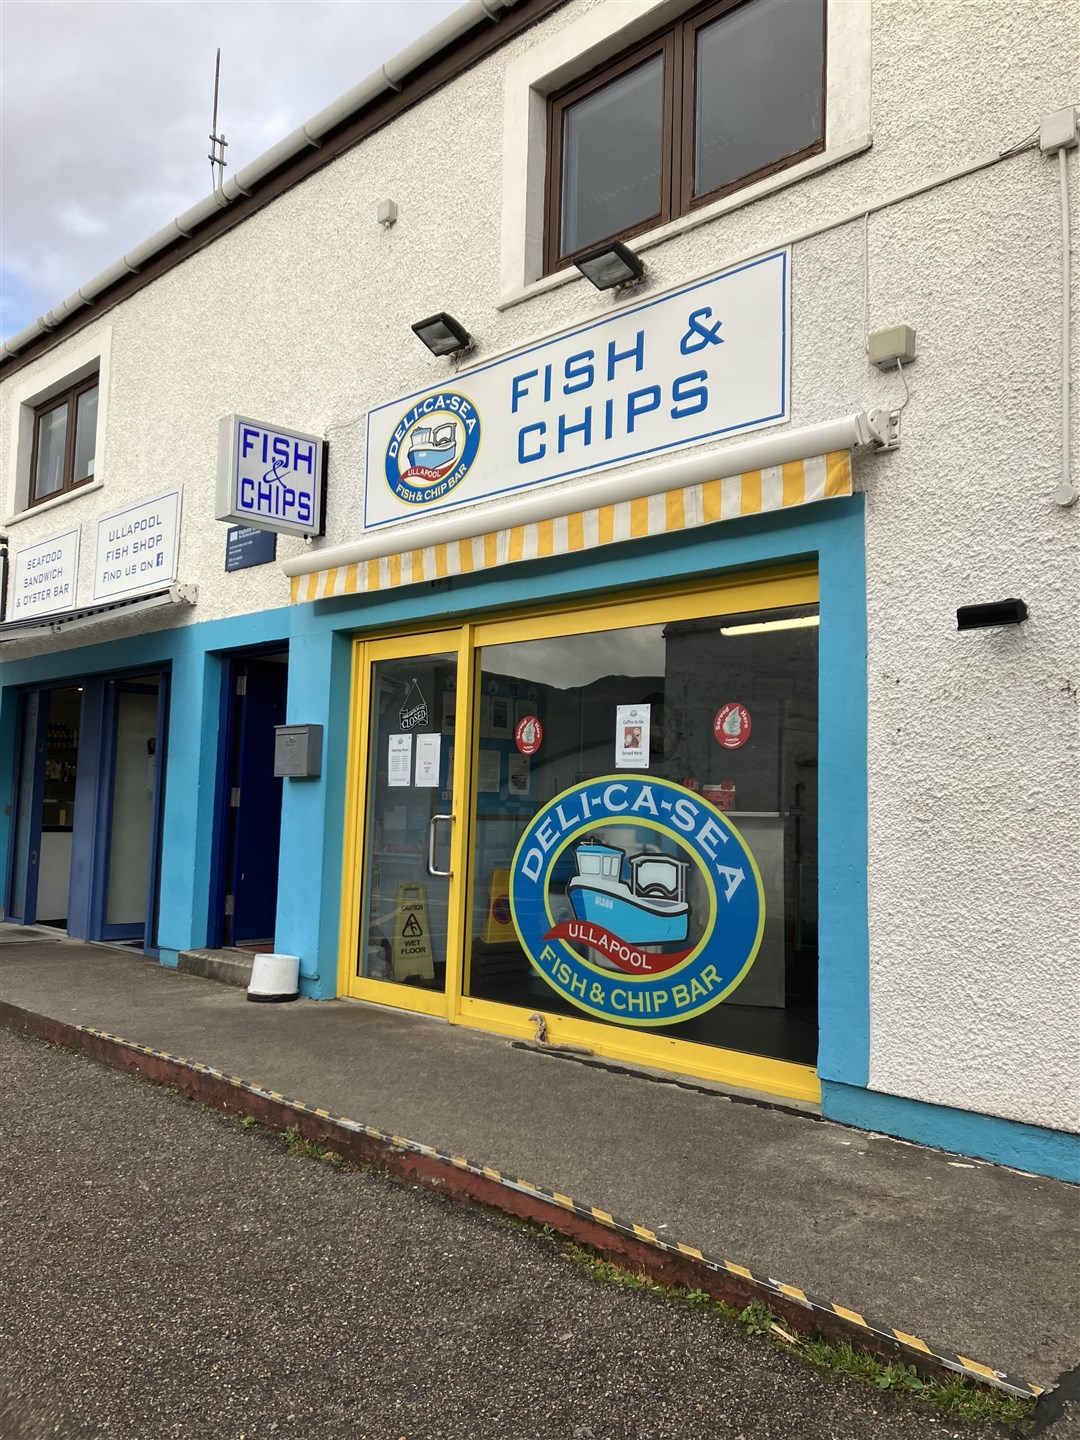 Delicasea Fish and Chips, in Ullapool on West Shore St. Picture: Iona MacDonald.